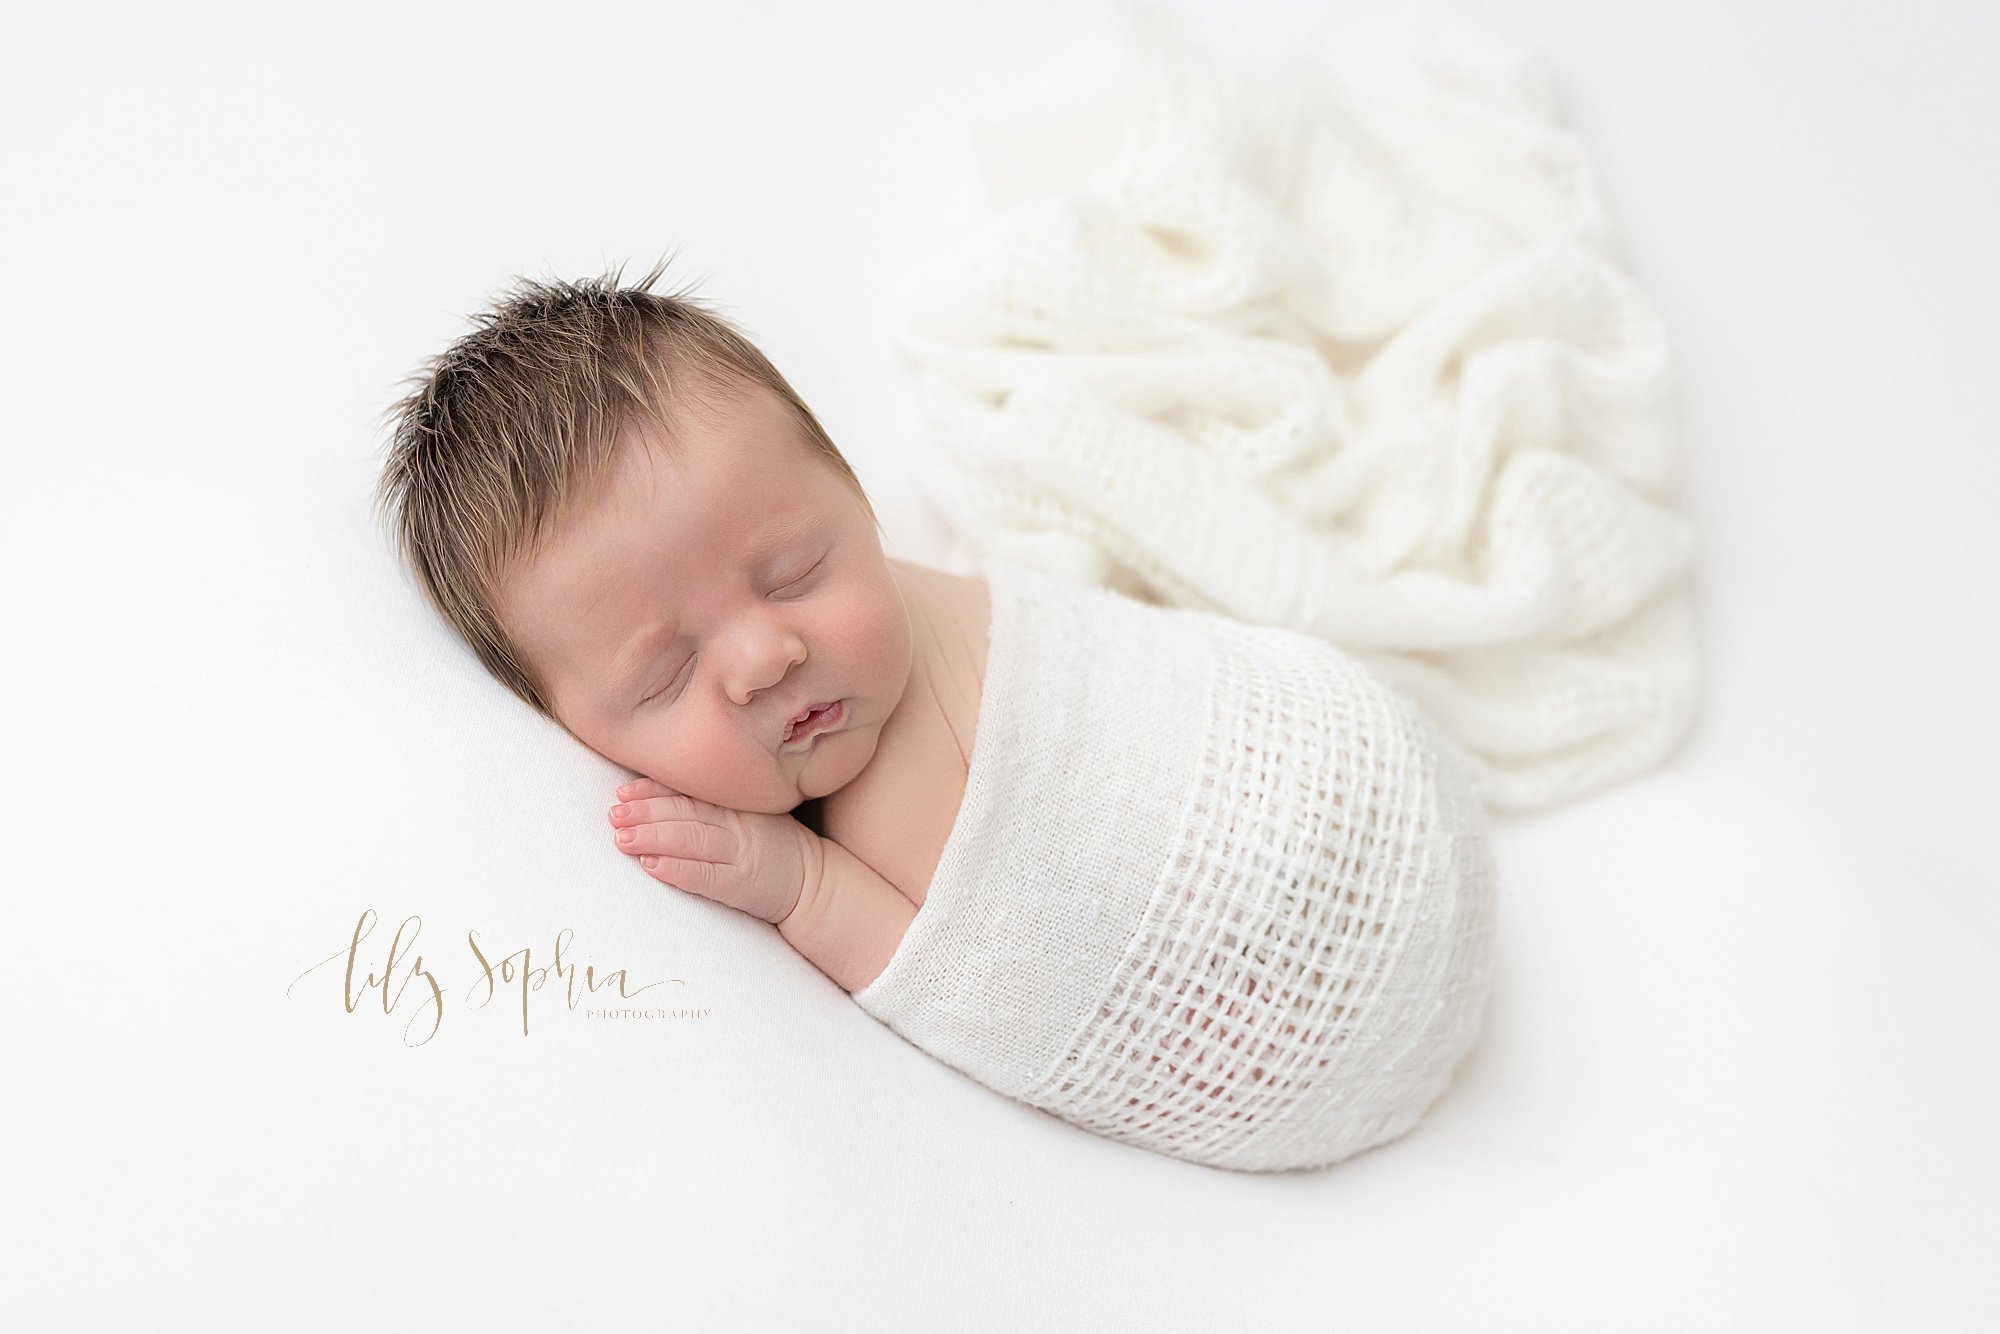  Newborn photo session of a newborn baby boy lying on his stomach with his hand under his right cheek as he is draped in a soft white knitted blanket taken in a natural light studio near Alpharetta in Atlanta, Georgia. 